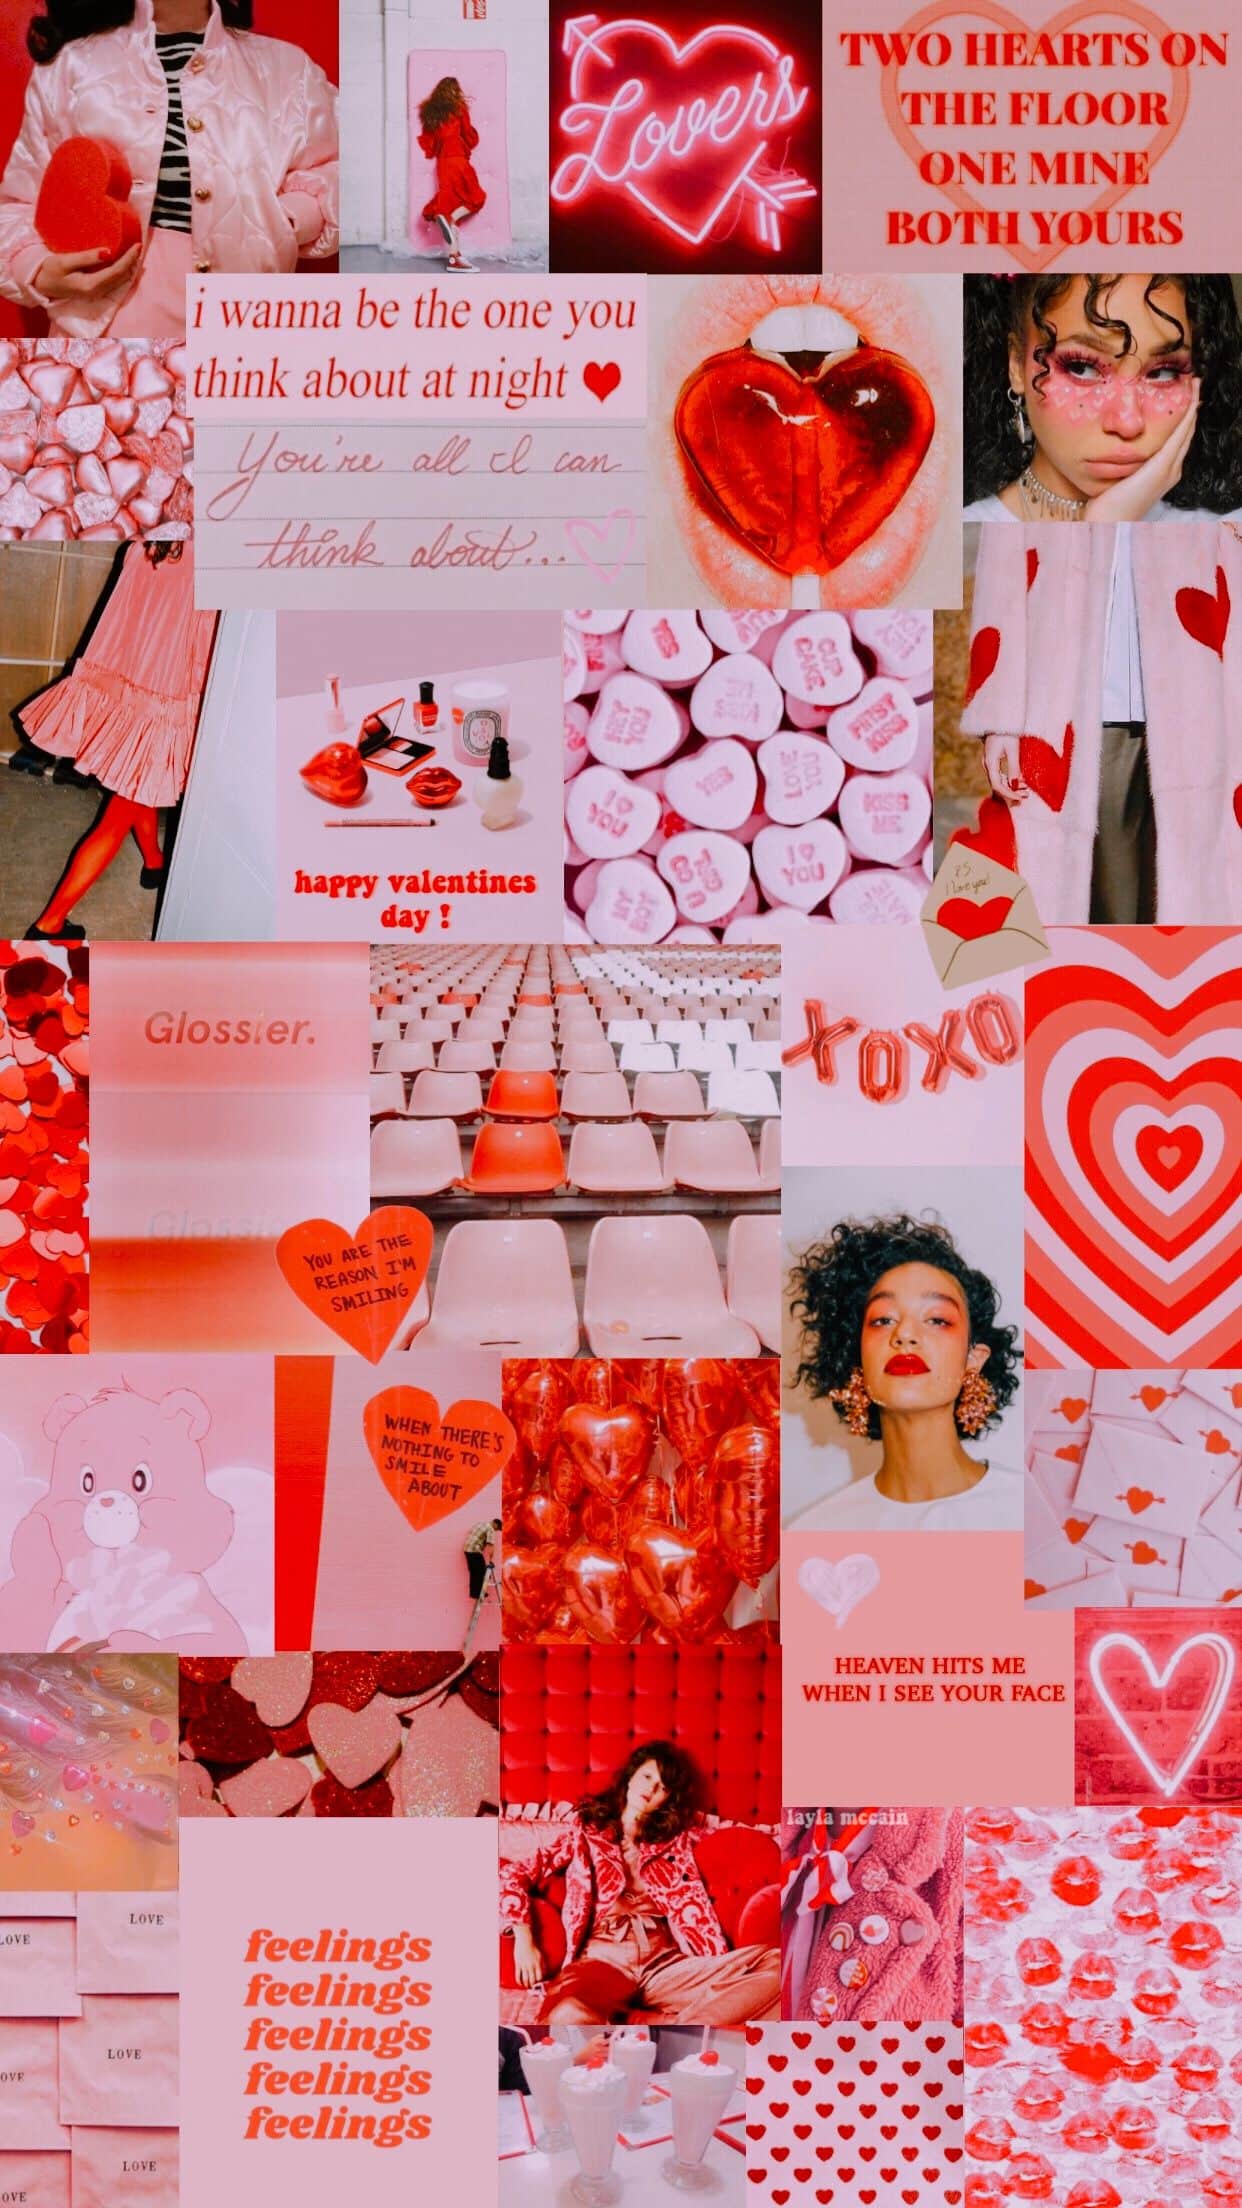 20 Free Valentine’s Day Wallpapers For iPhone. - HONESTLYBECCA